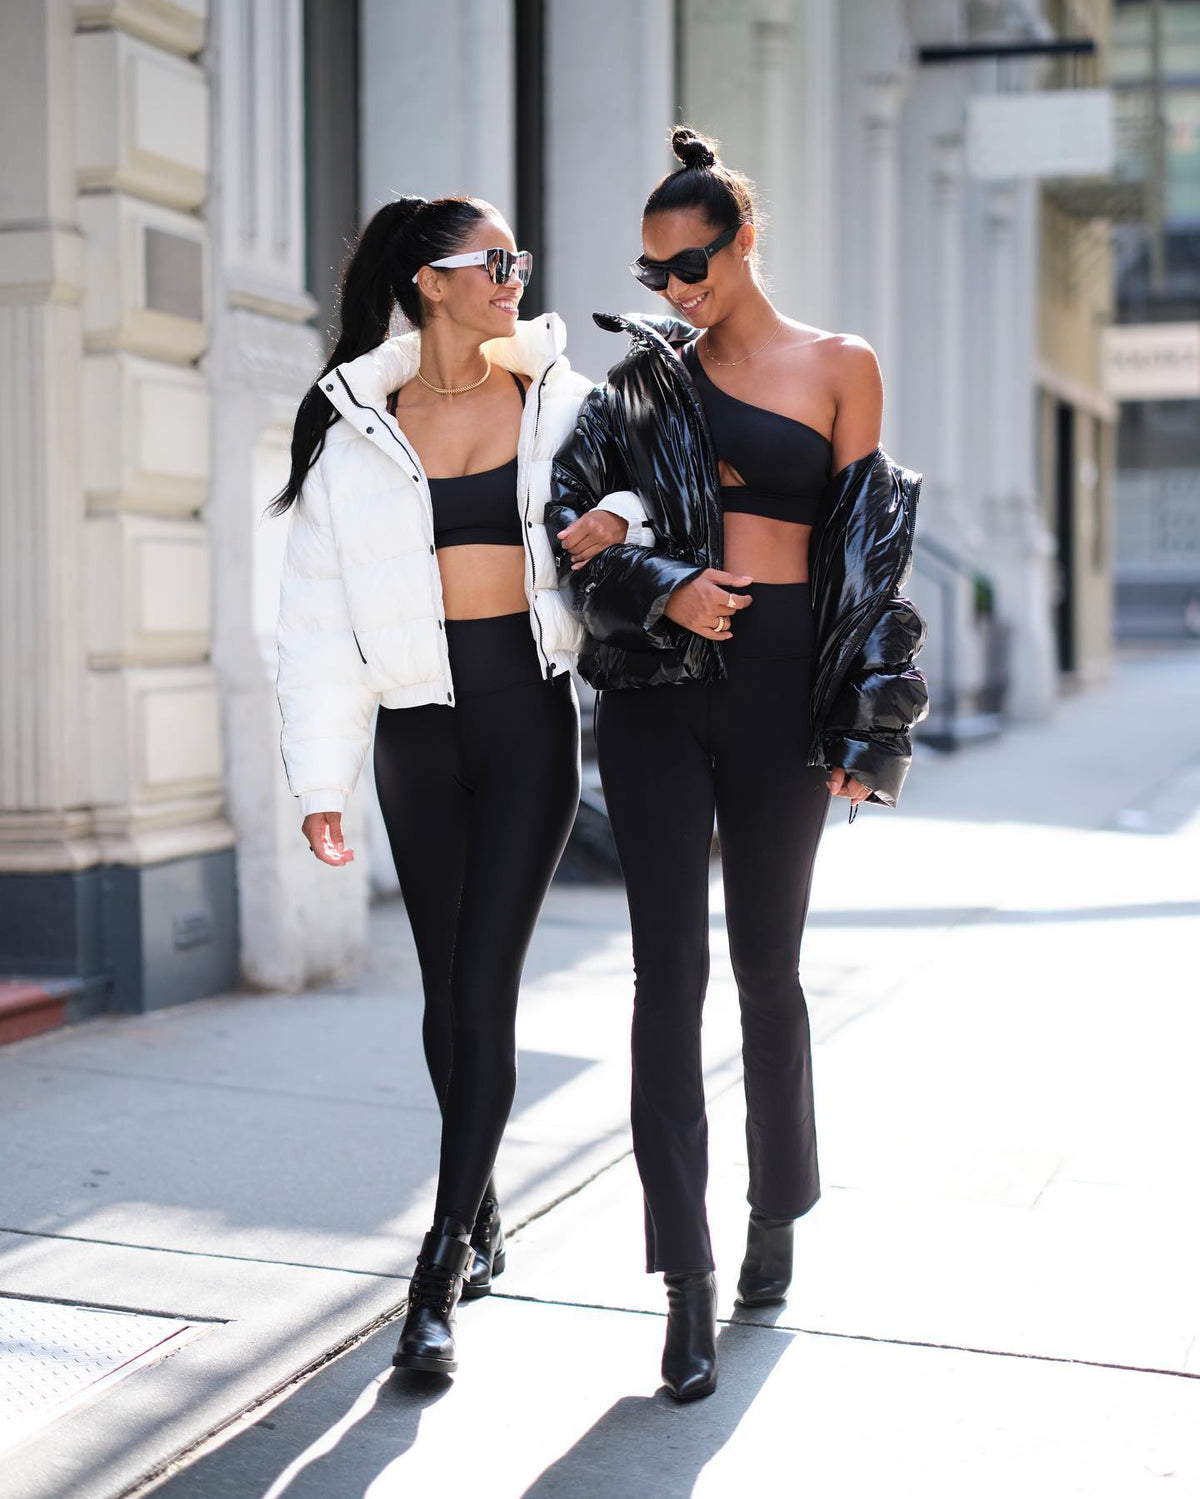 @daianesodre and @laisribeiro wearing head-to-toe Alo outfits while walking the streets of New York in between shows. 